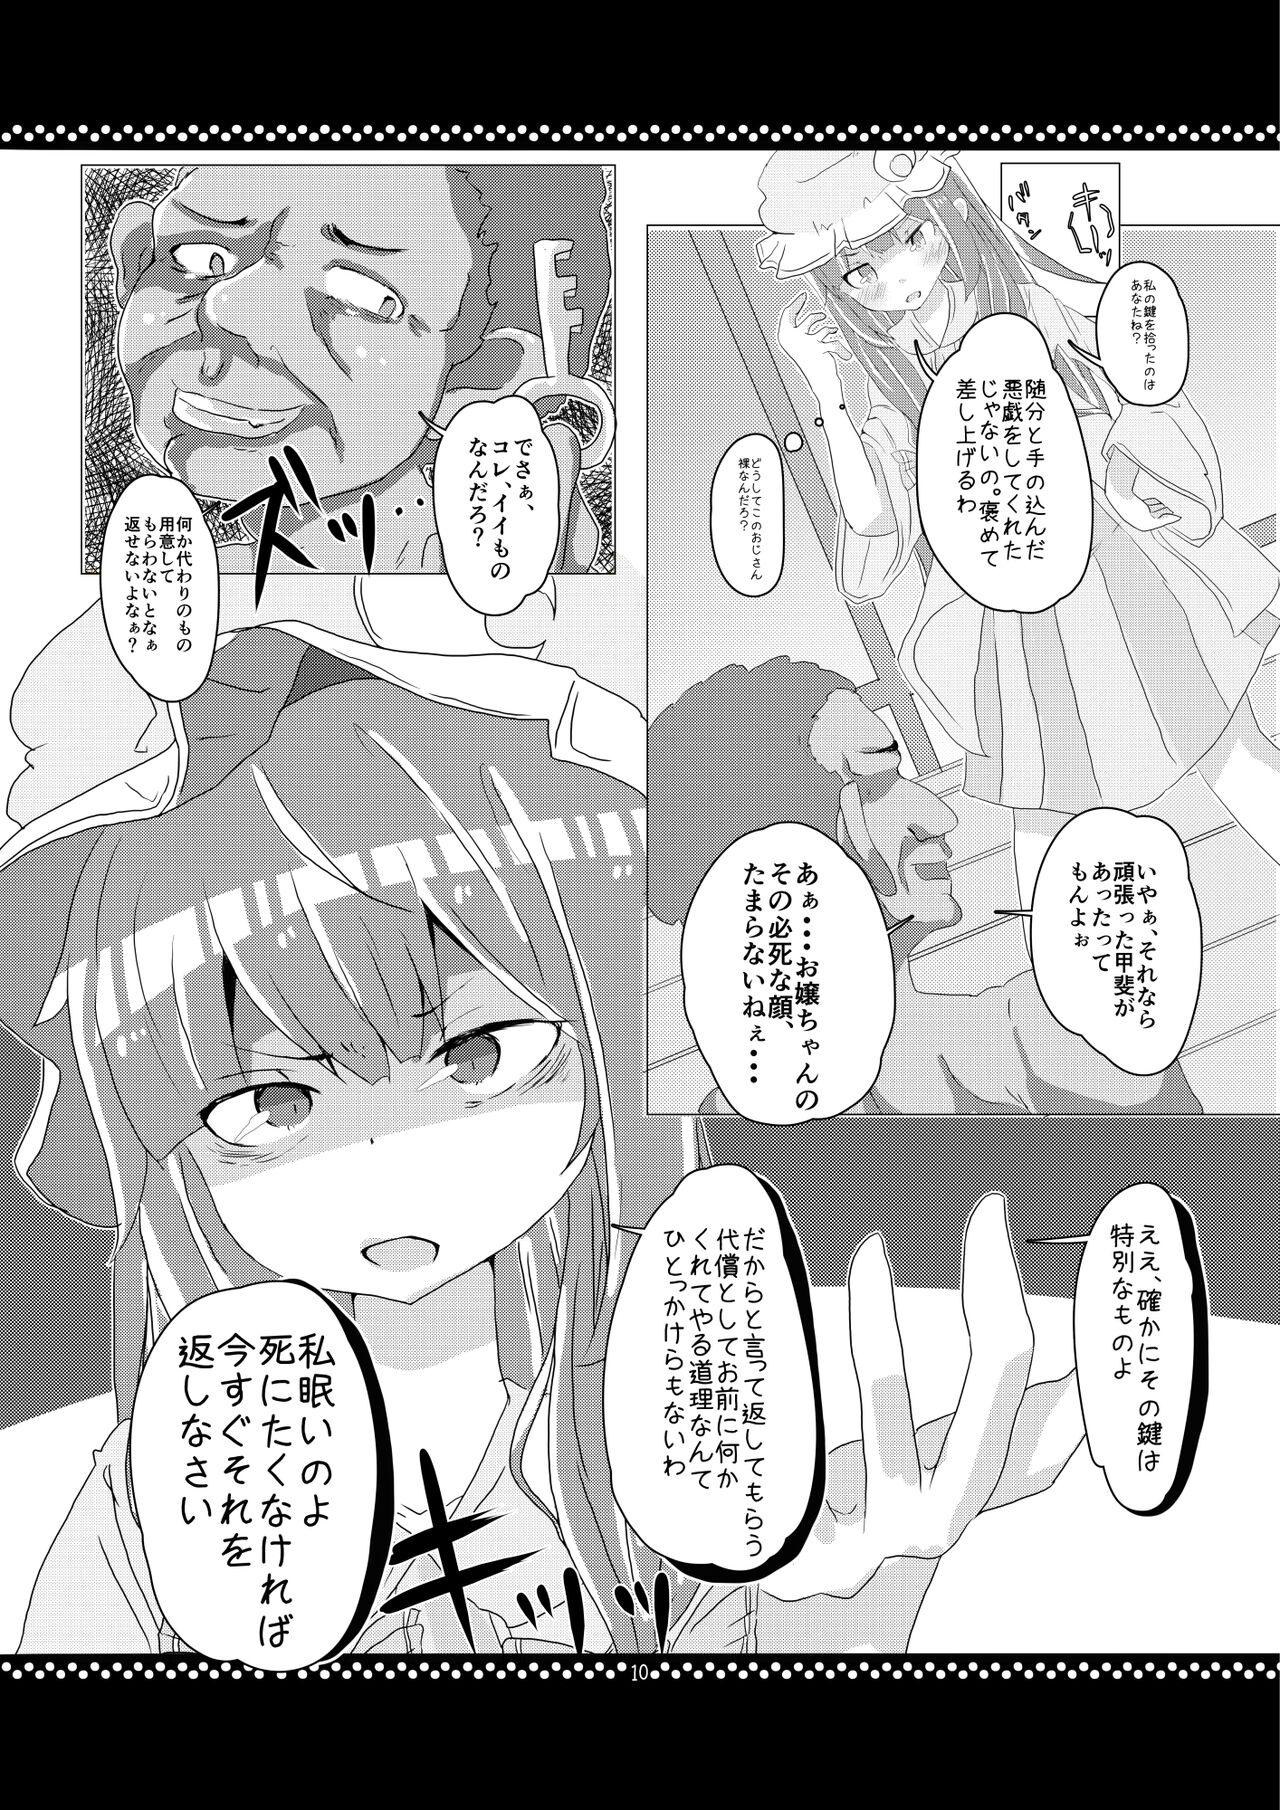 18 Porn 従順？パチュリーさま！ - Touhou project Gay Gloryhole - Page 9